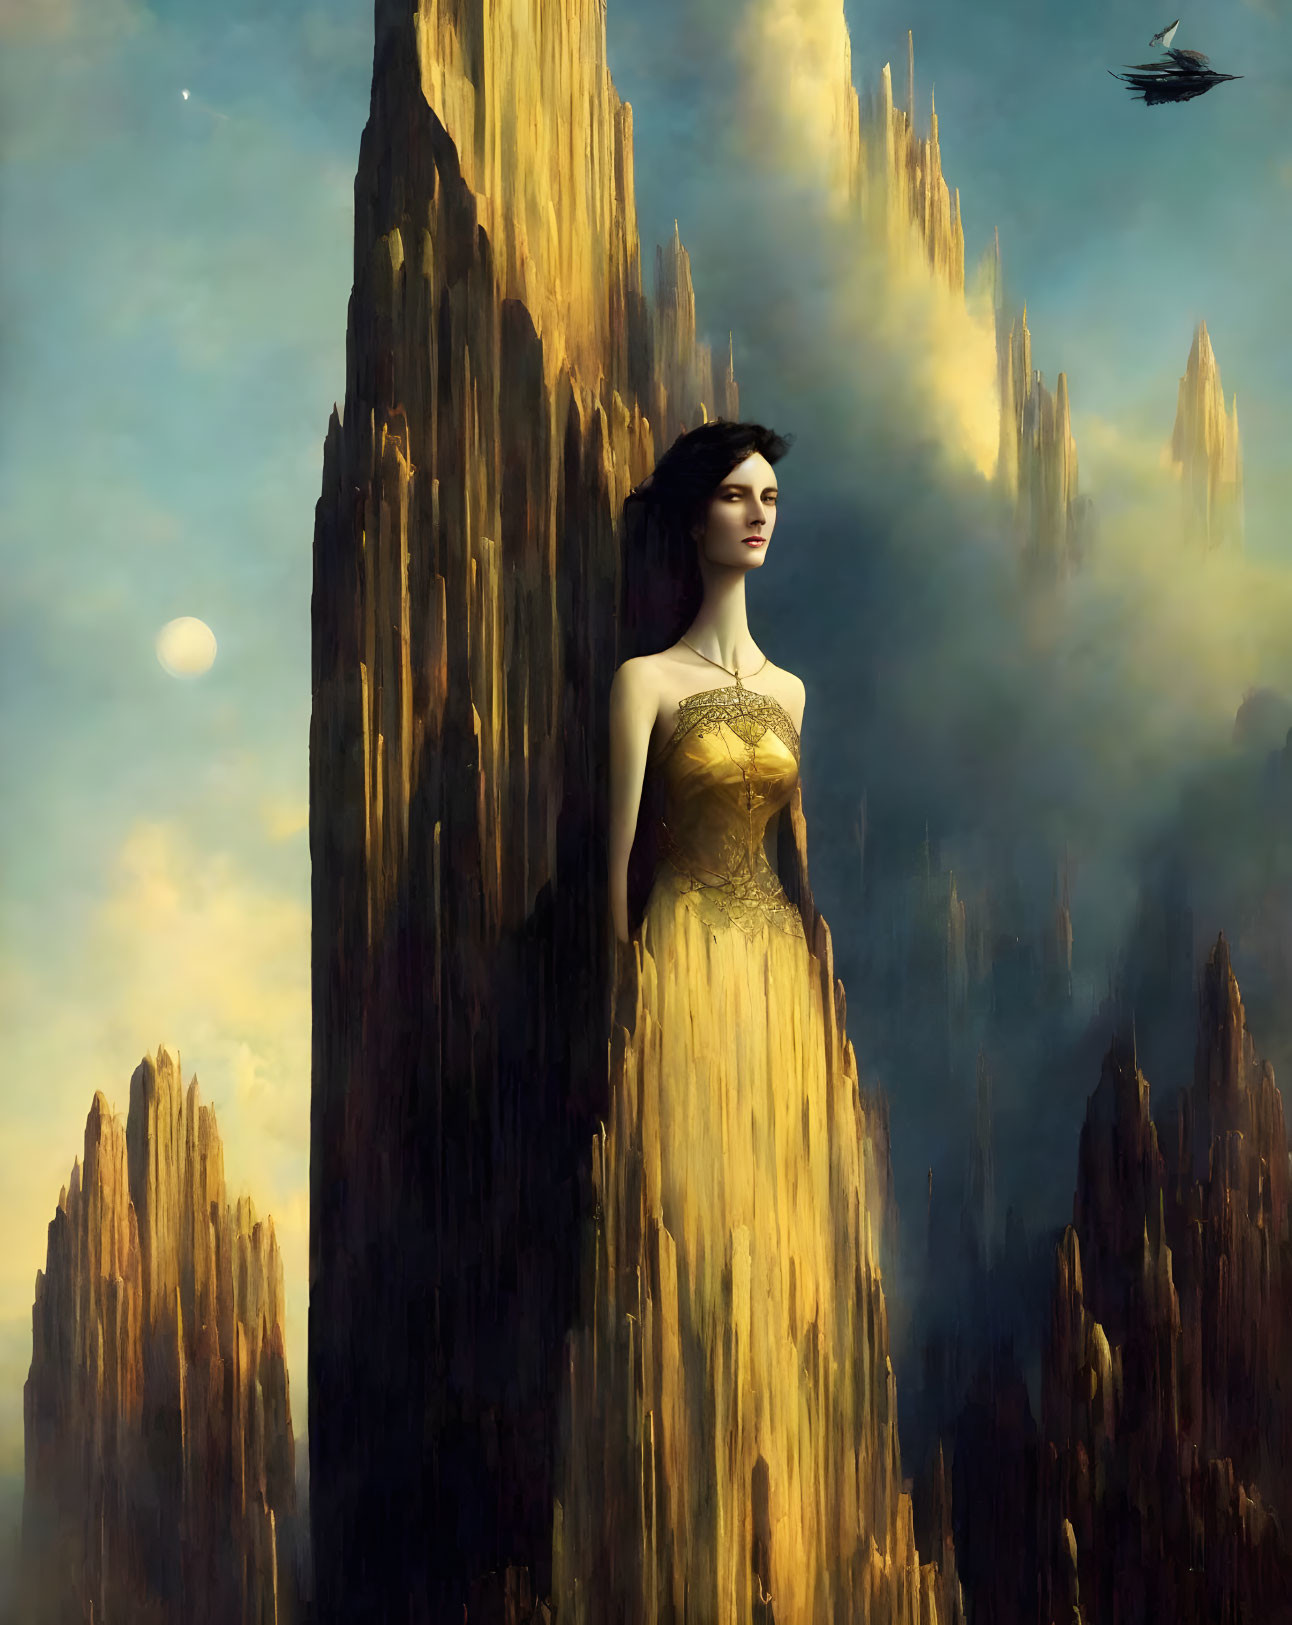 Woman in golden dress among rock formations under dual moons with flying ship